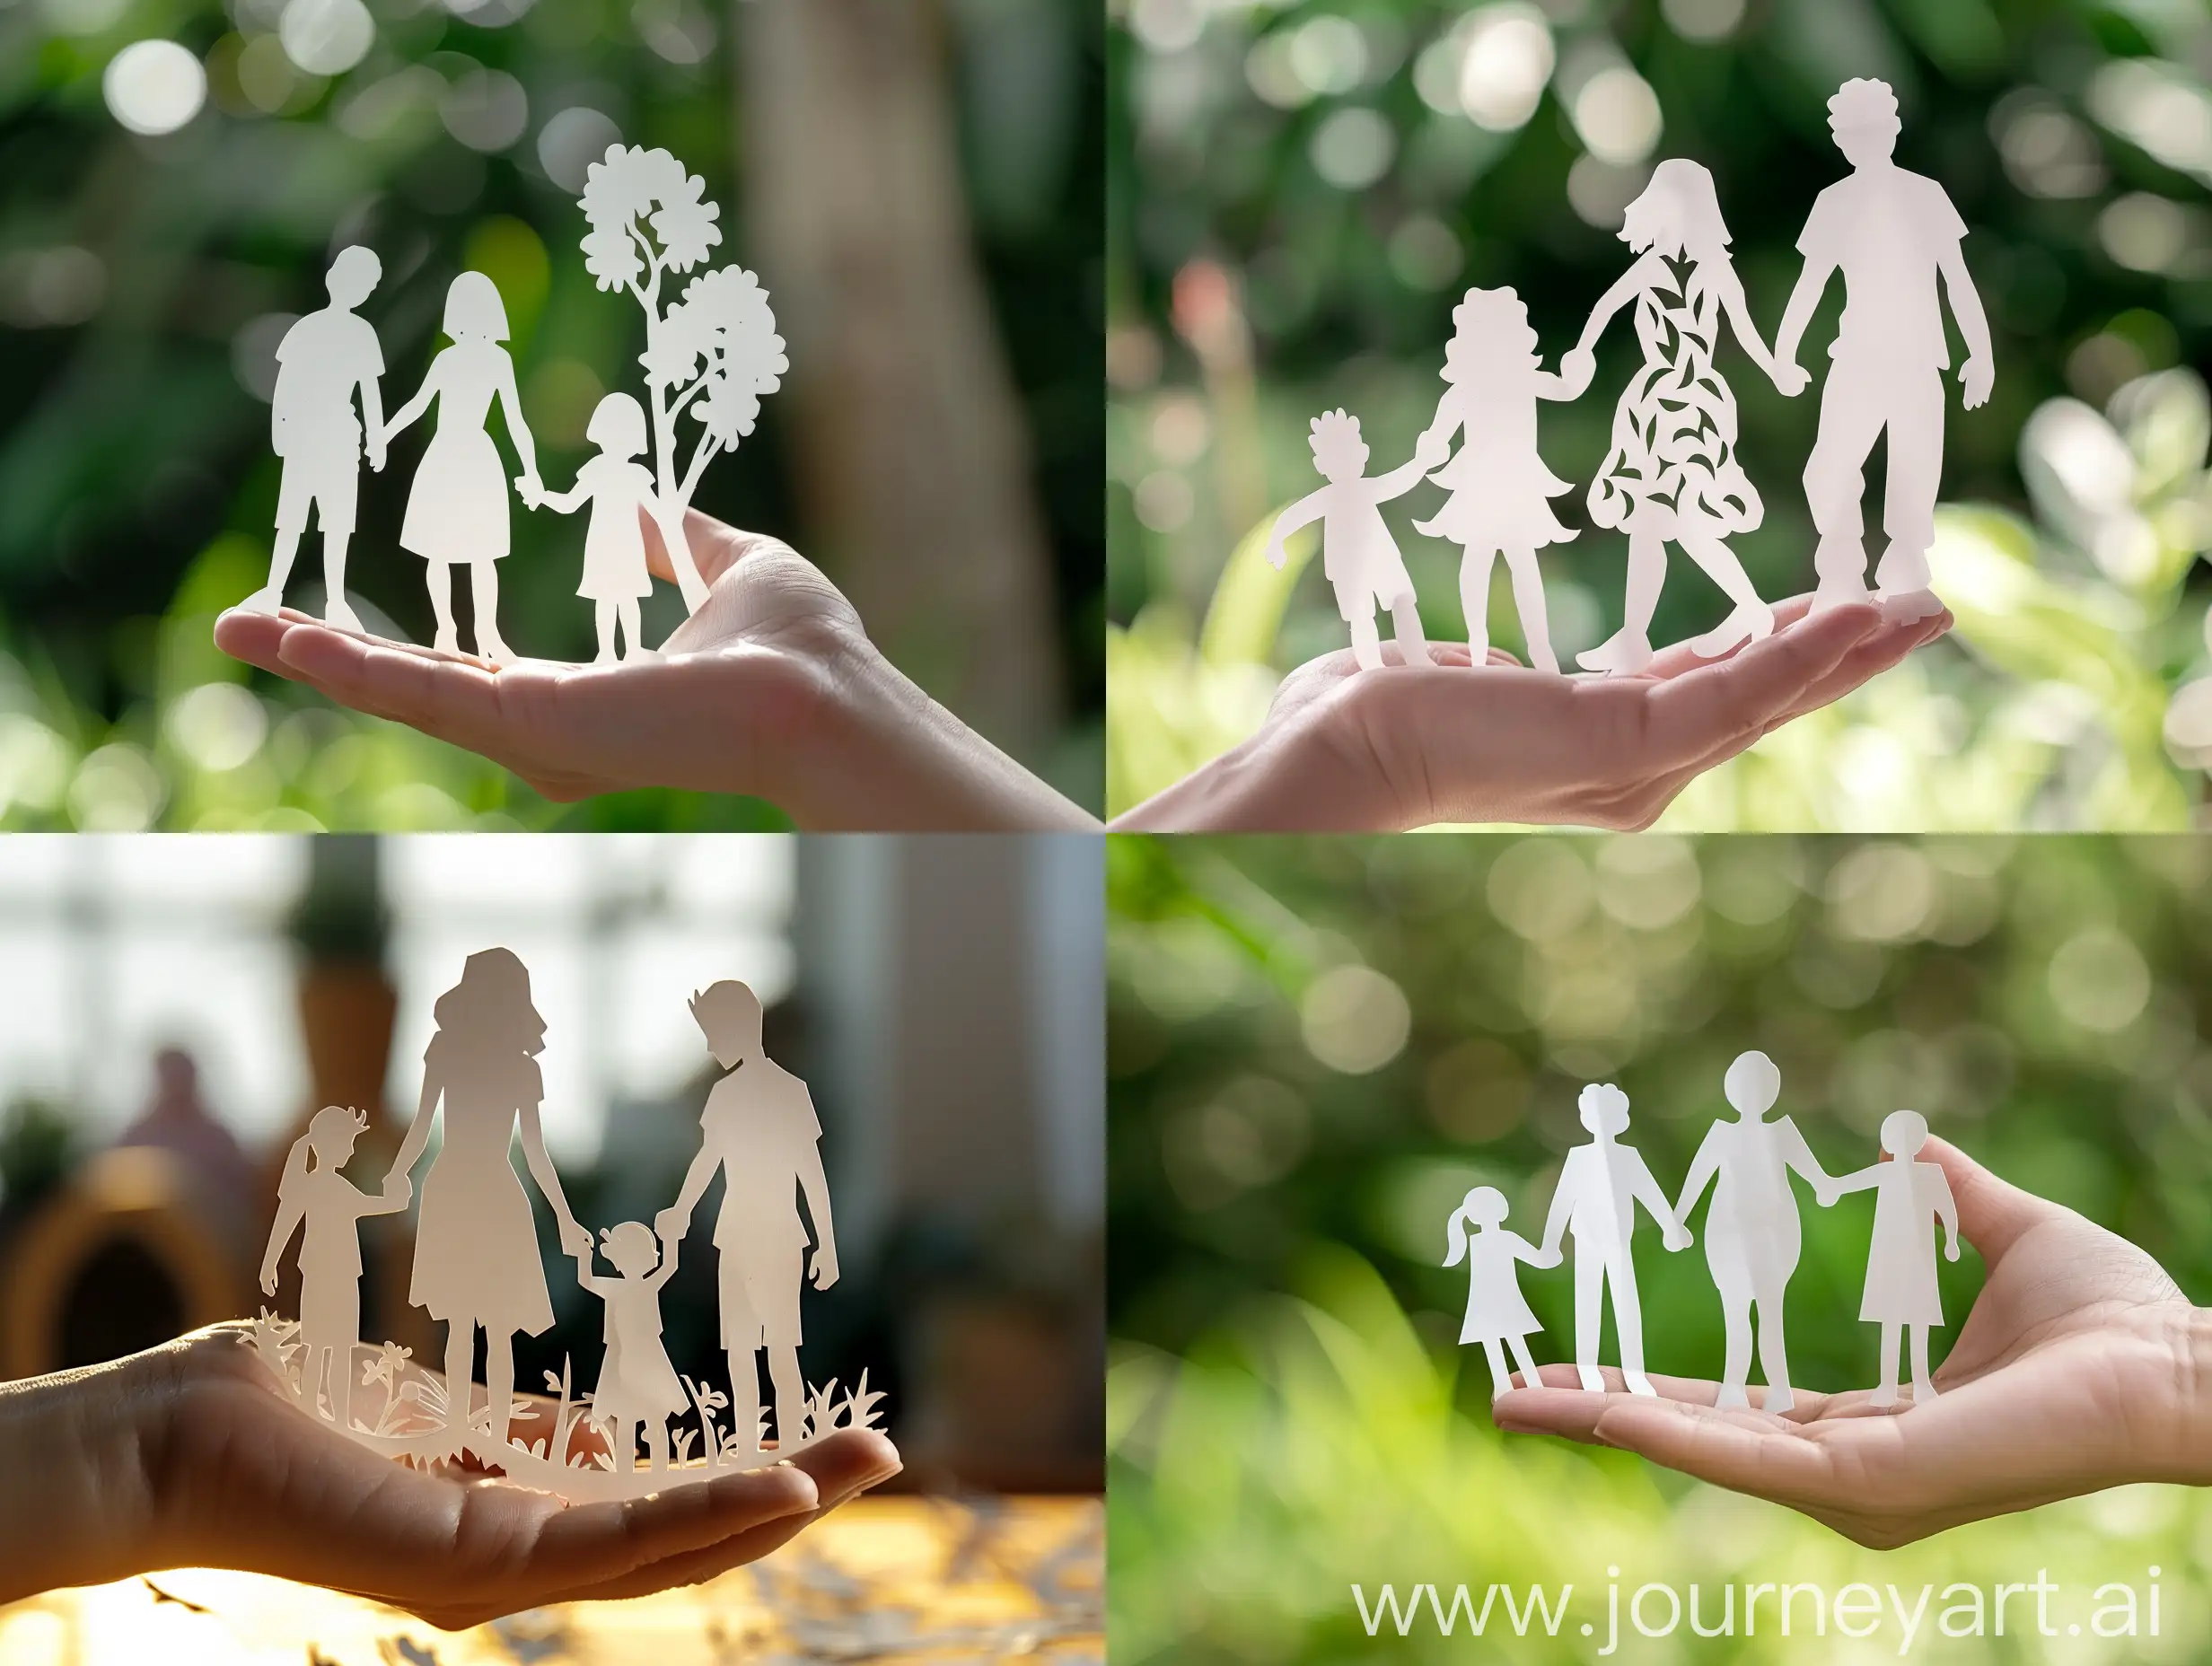 Supportive-Hand-Holding-Paper-Cut-Family-Building-Homes-and-Connections